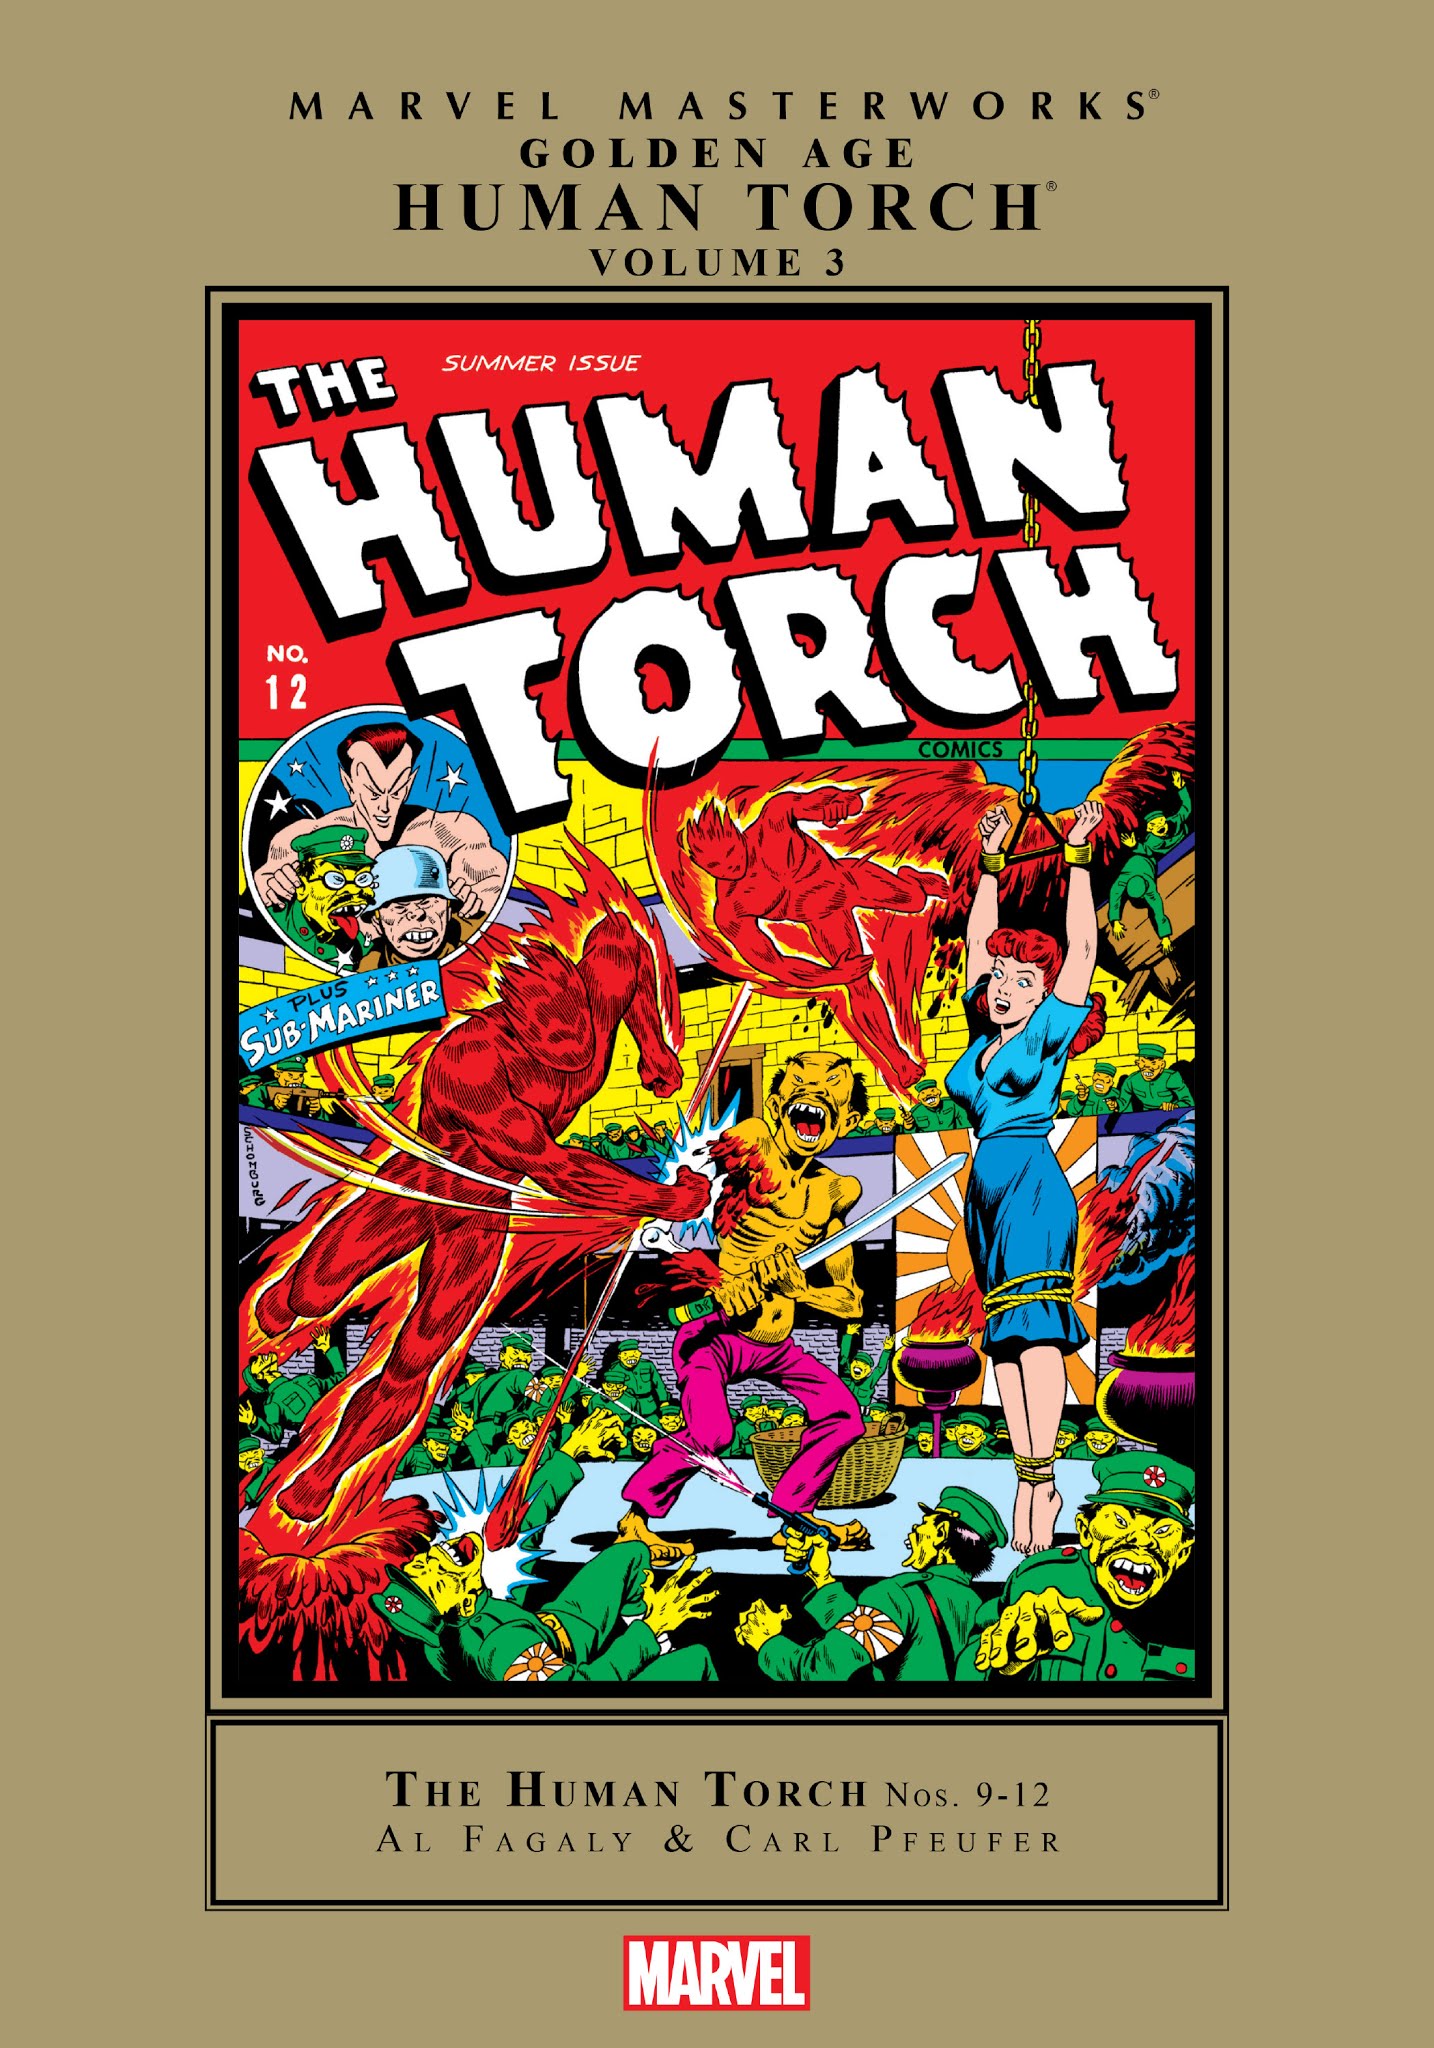 Read online Marvel Masterworks: Golden Age Human Torch comic -  Issue # TPB 3 (Part 1) - 1